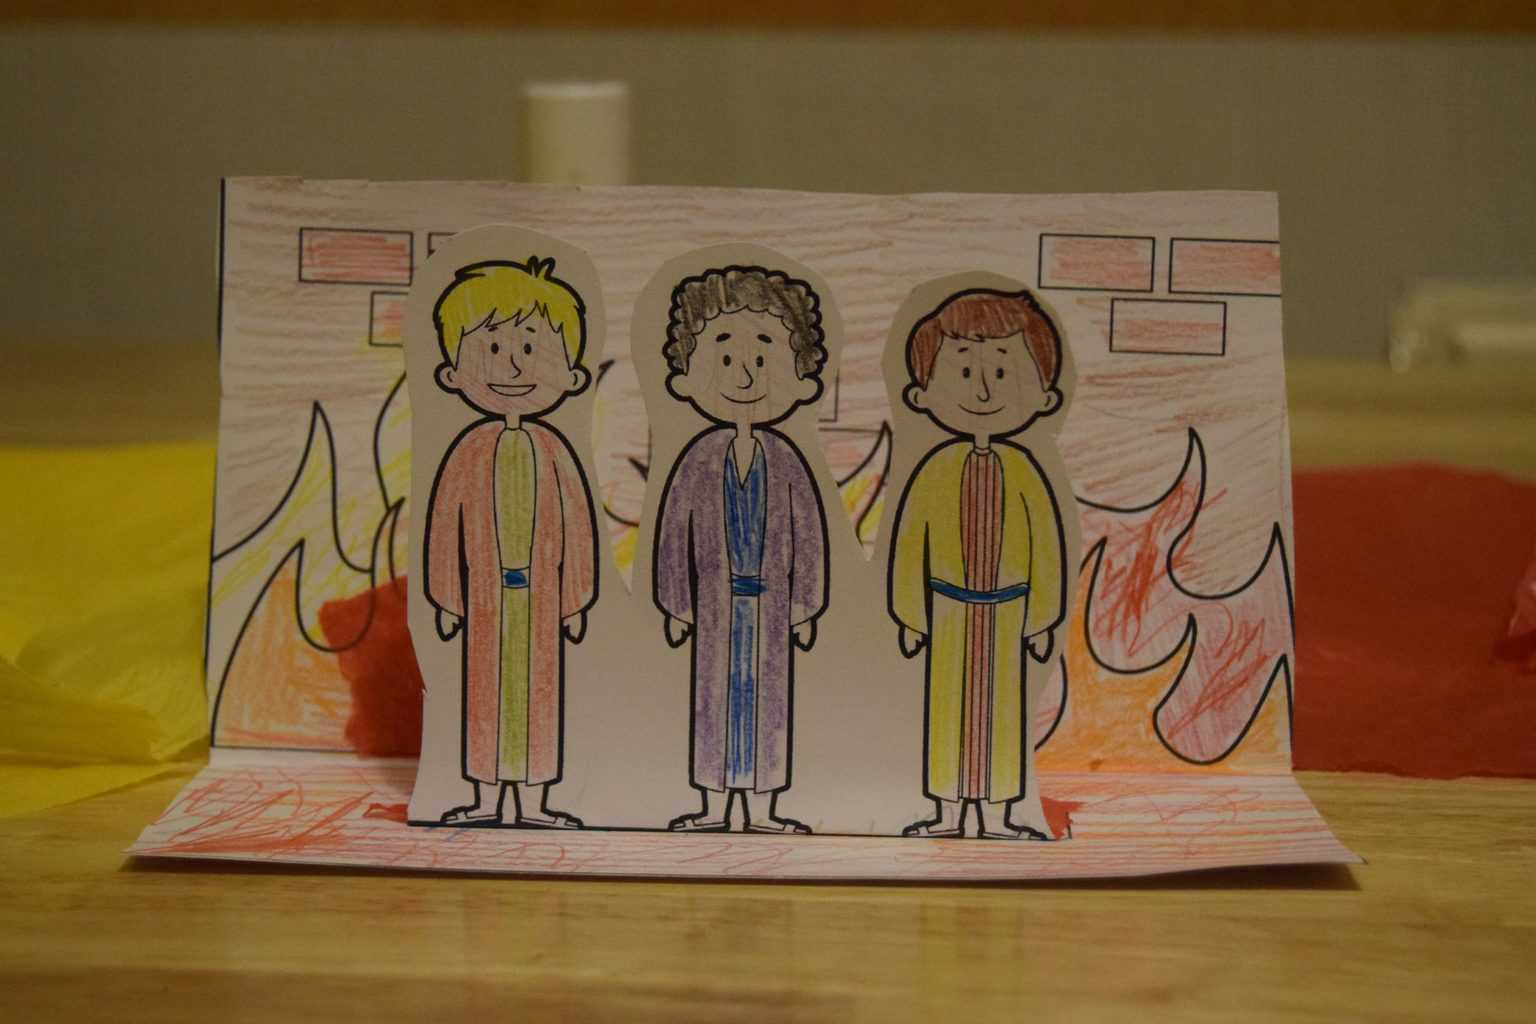 daniel shadrach meshach and abednego coloring pages